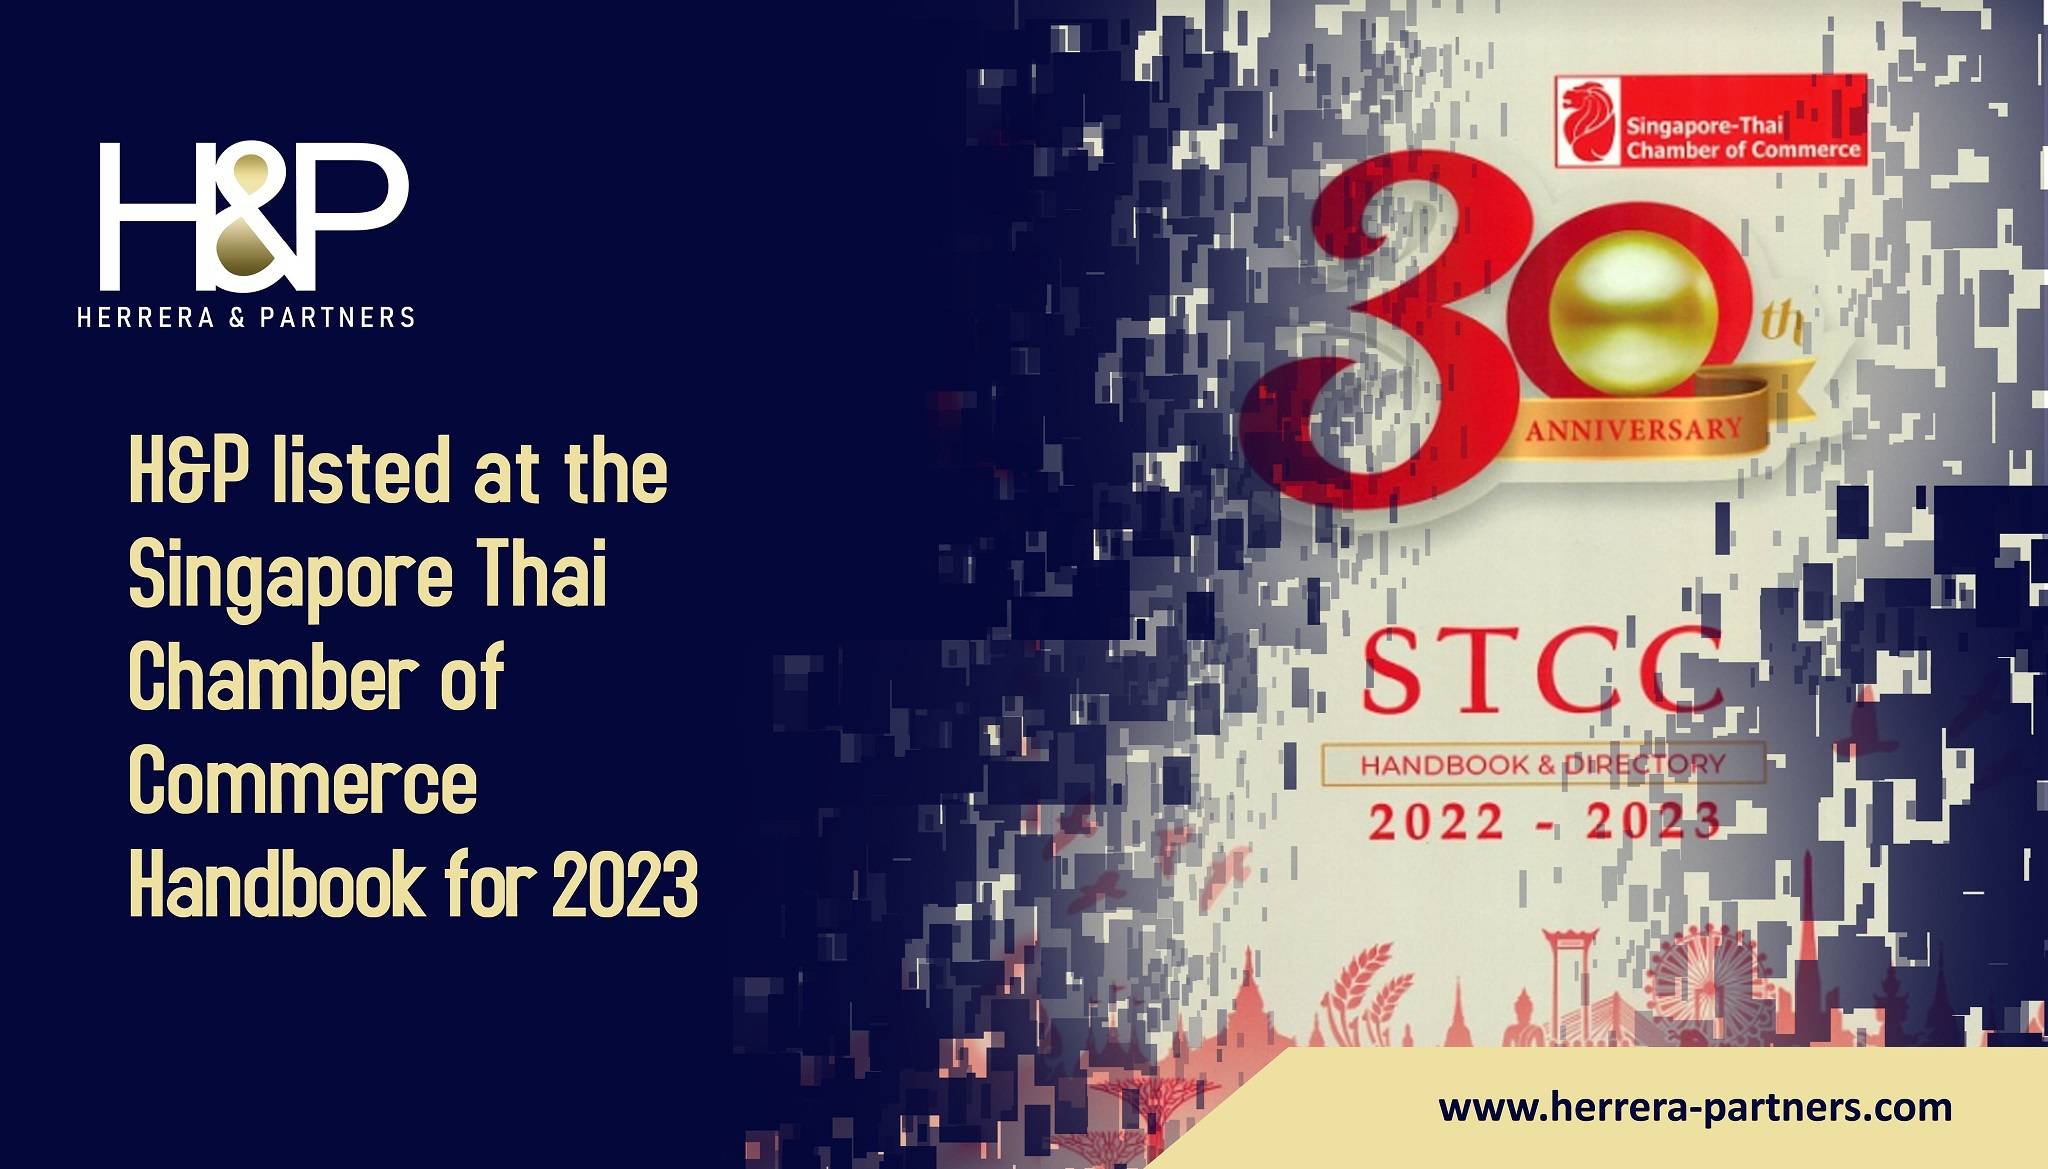 HP Bangkok Law firm listed at the Singapore Thai Chamber of Commerce in 2023 1